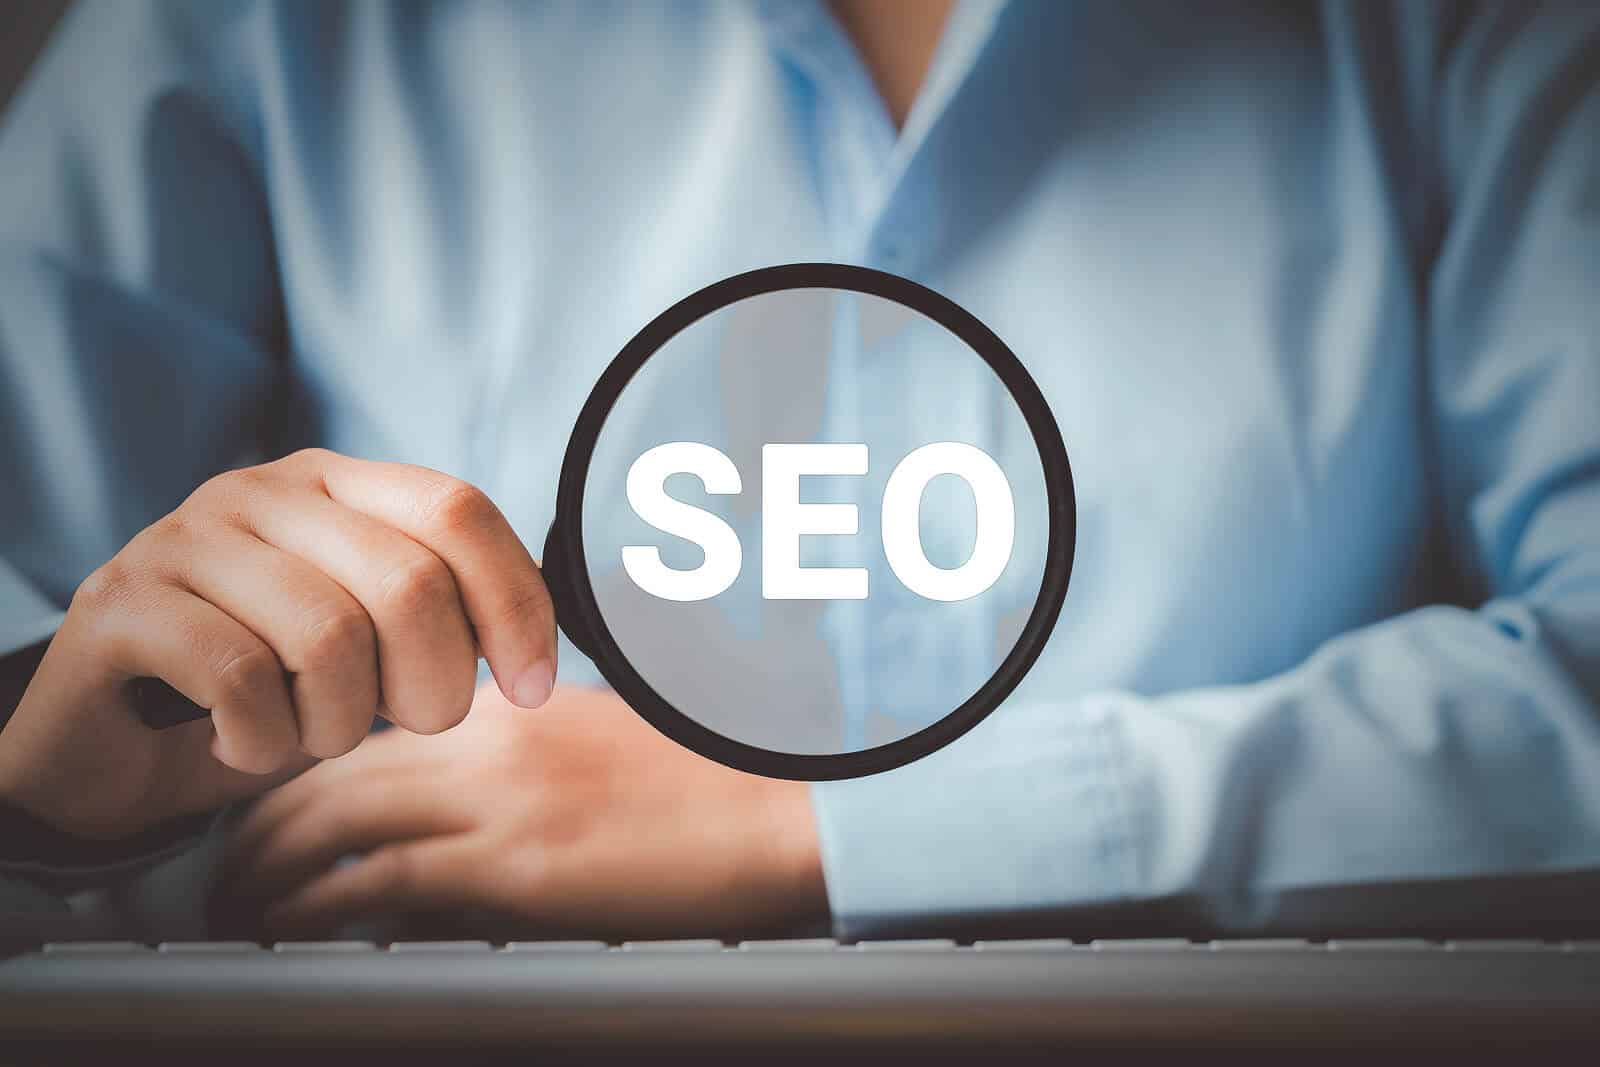 Person holding a magnifying glass with "SEO" in the glass. You can get custom SEO services for therapists and private practice websites with our mental health SEO experts for SEO copywriting and higher rankings on Google and other search engines.